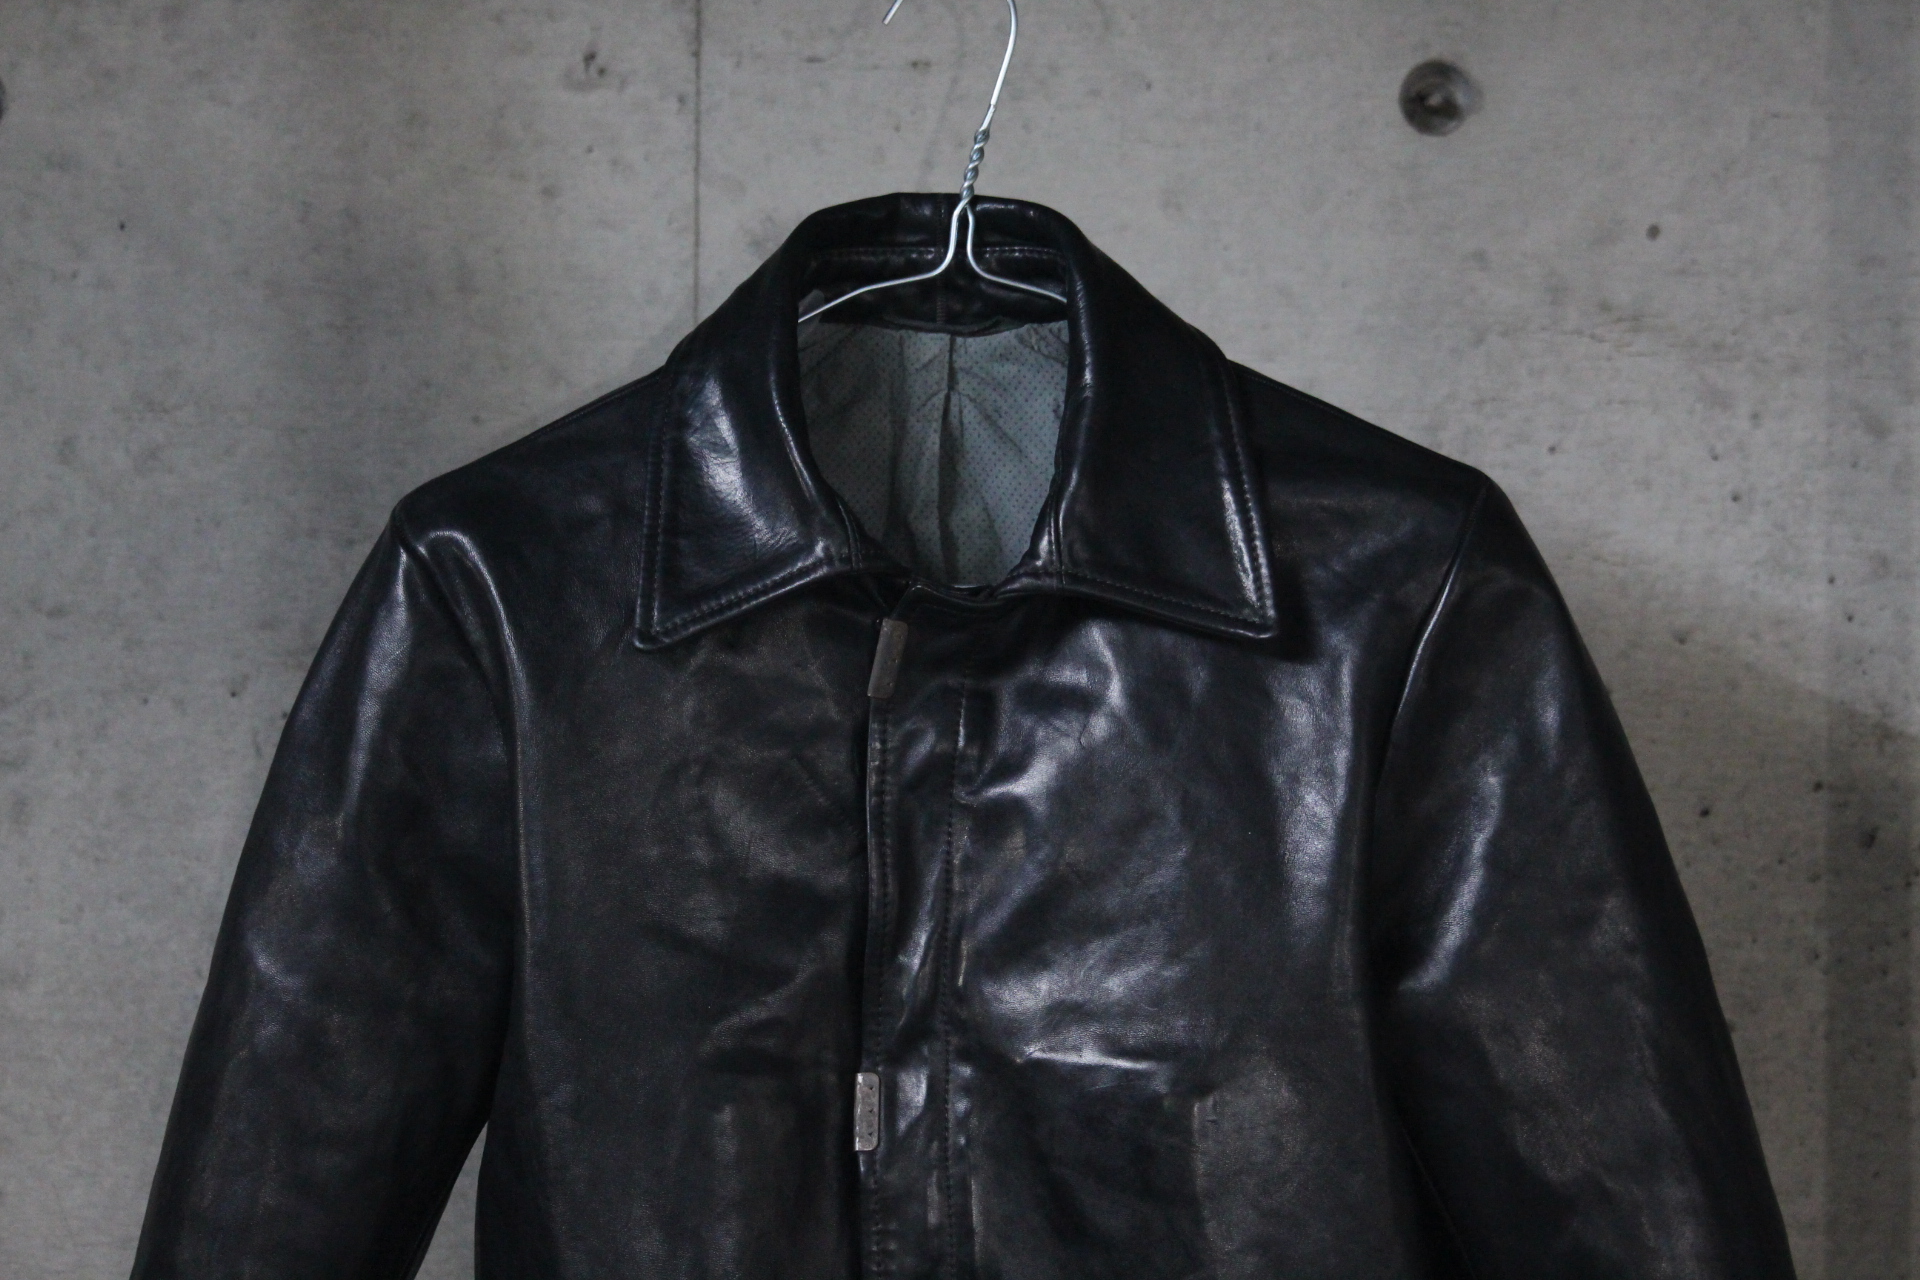 SCARSTITCHED LEATHER JACKET / CAROL CHRISTIAN POELL “LM/2498 CORS 